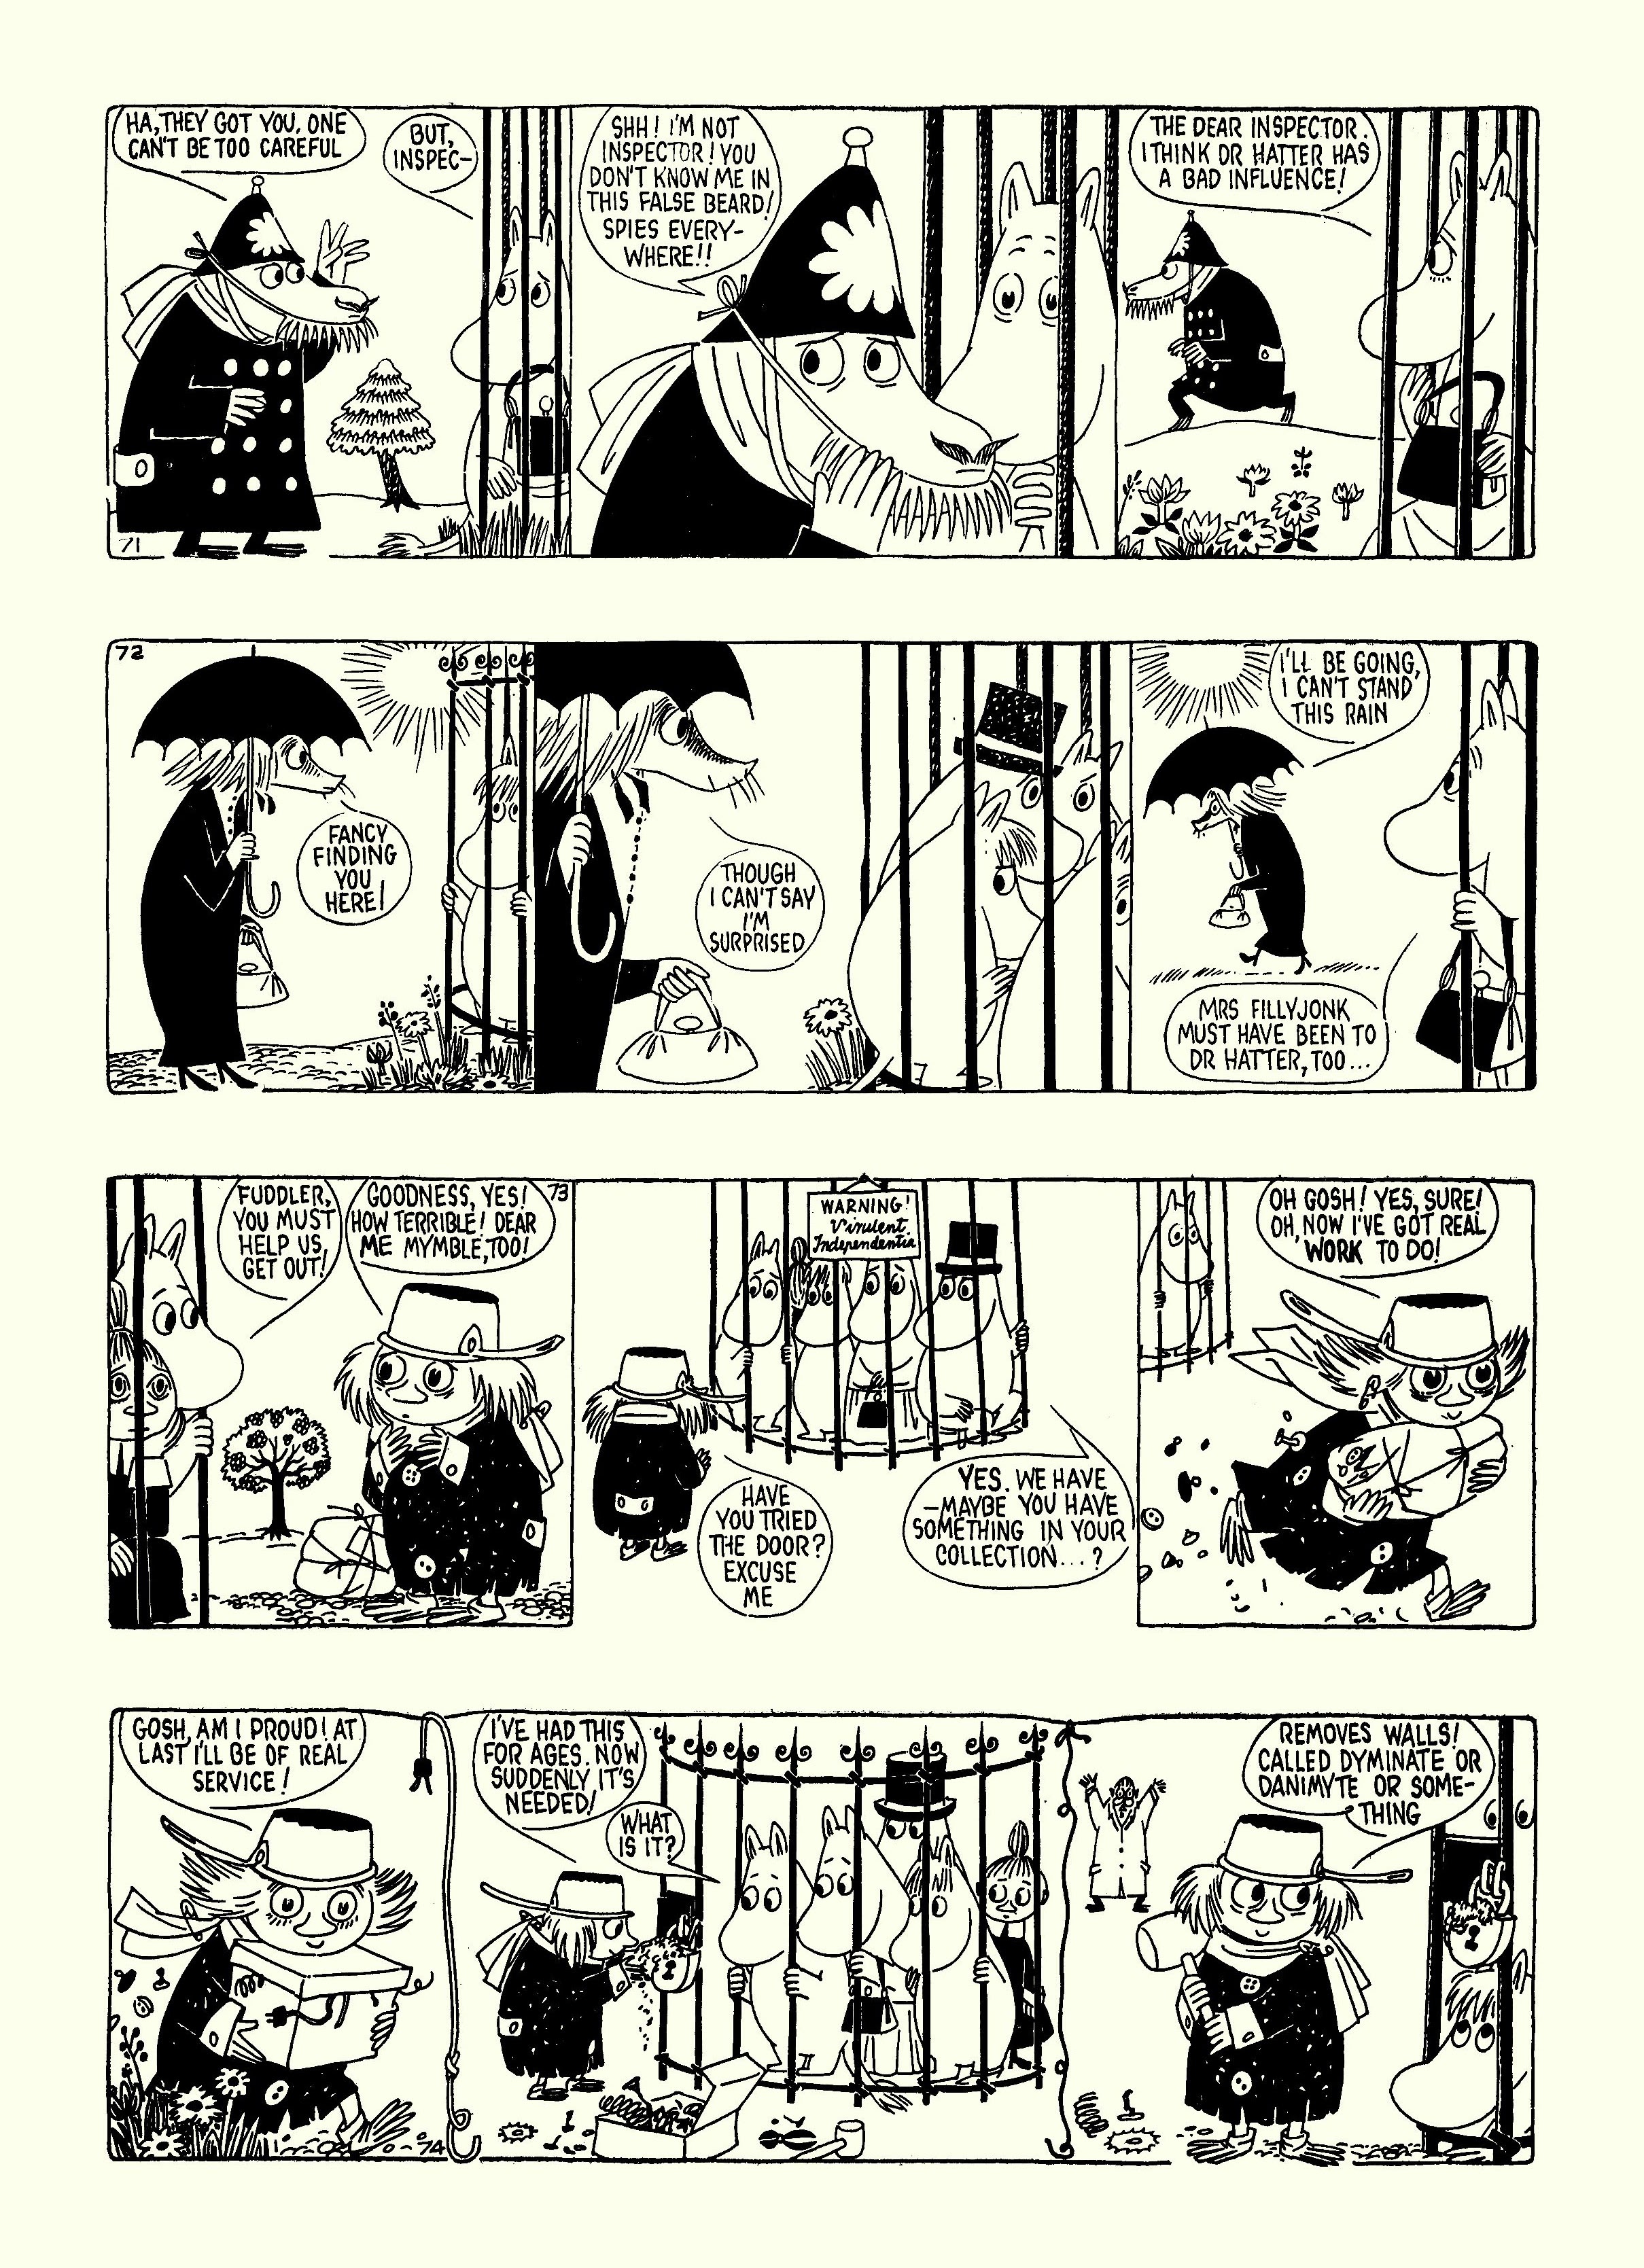 Read online Moomin: The Complete Tove Jansson Comic Strip comic -  Issue # TPB 5 - 75